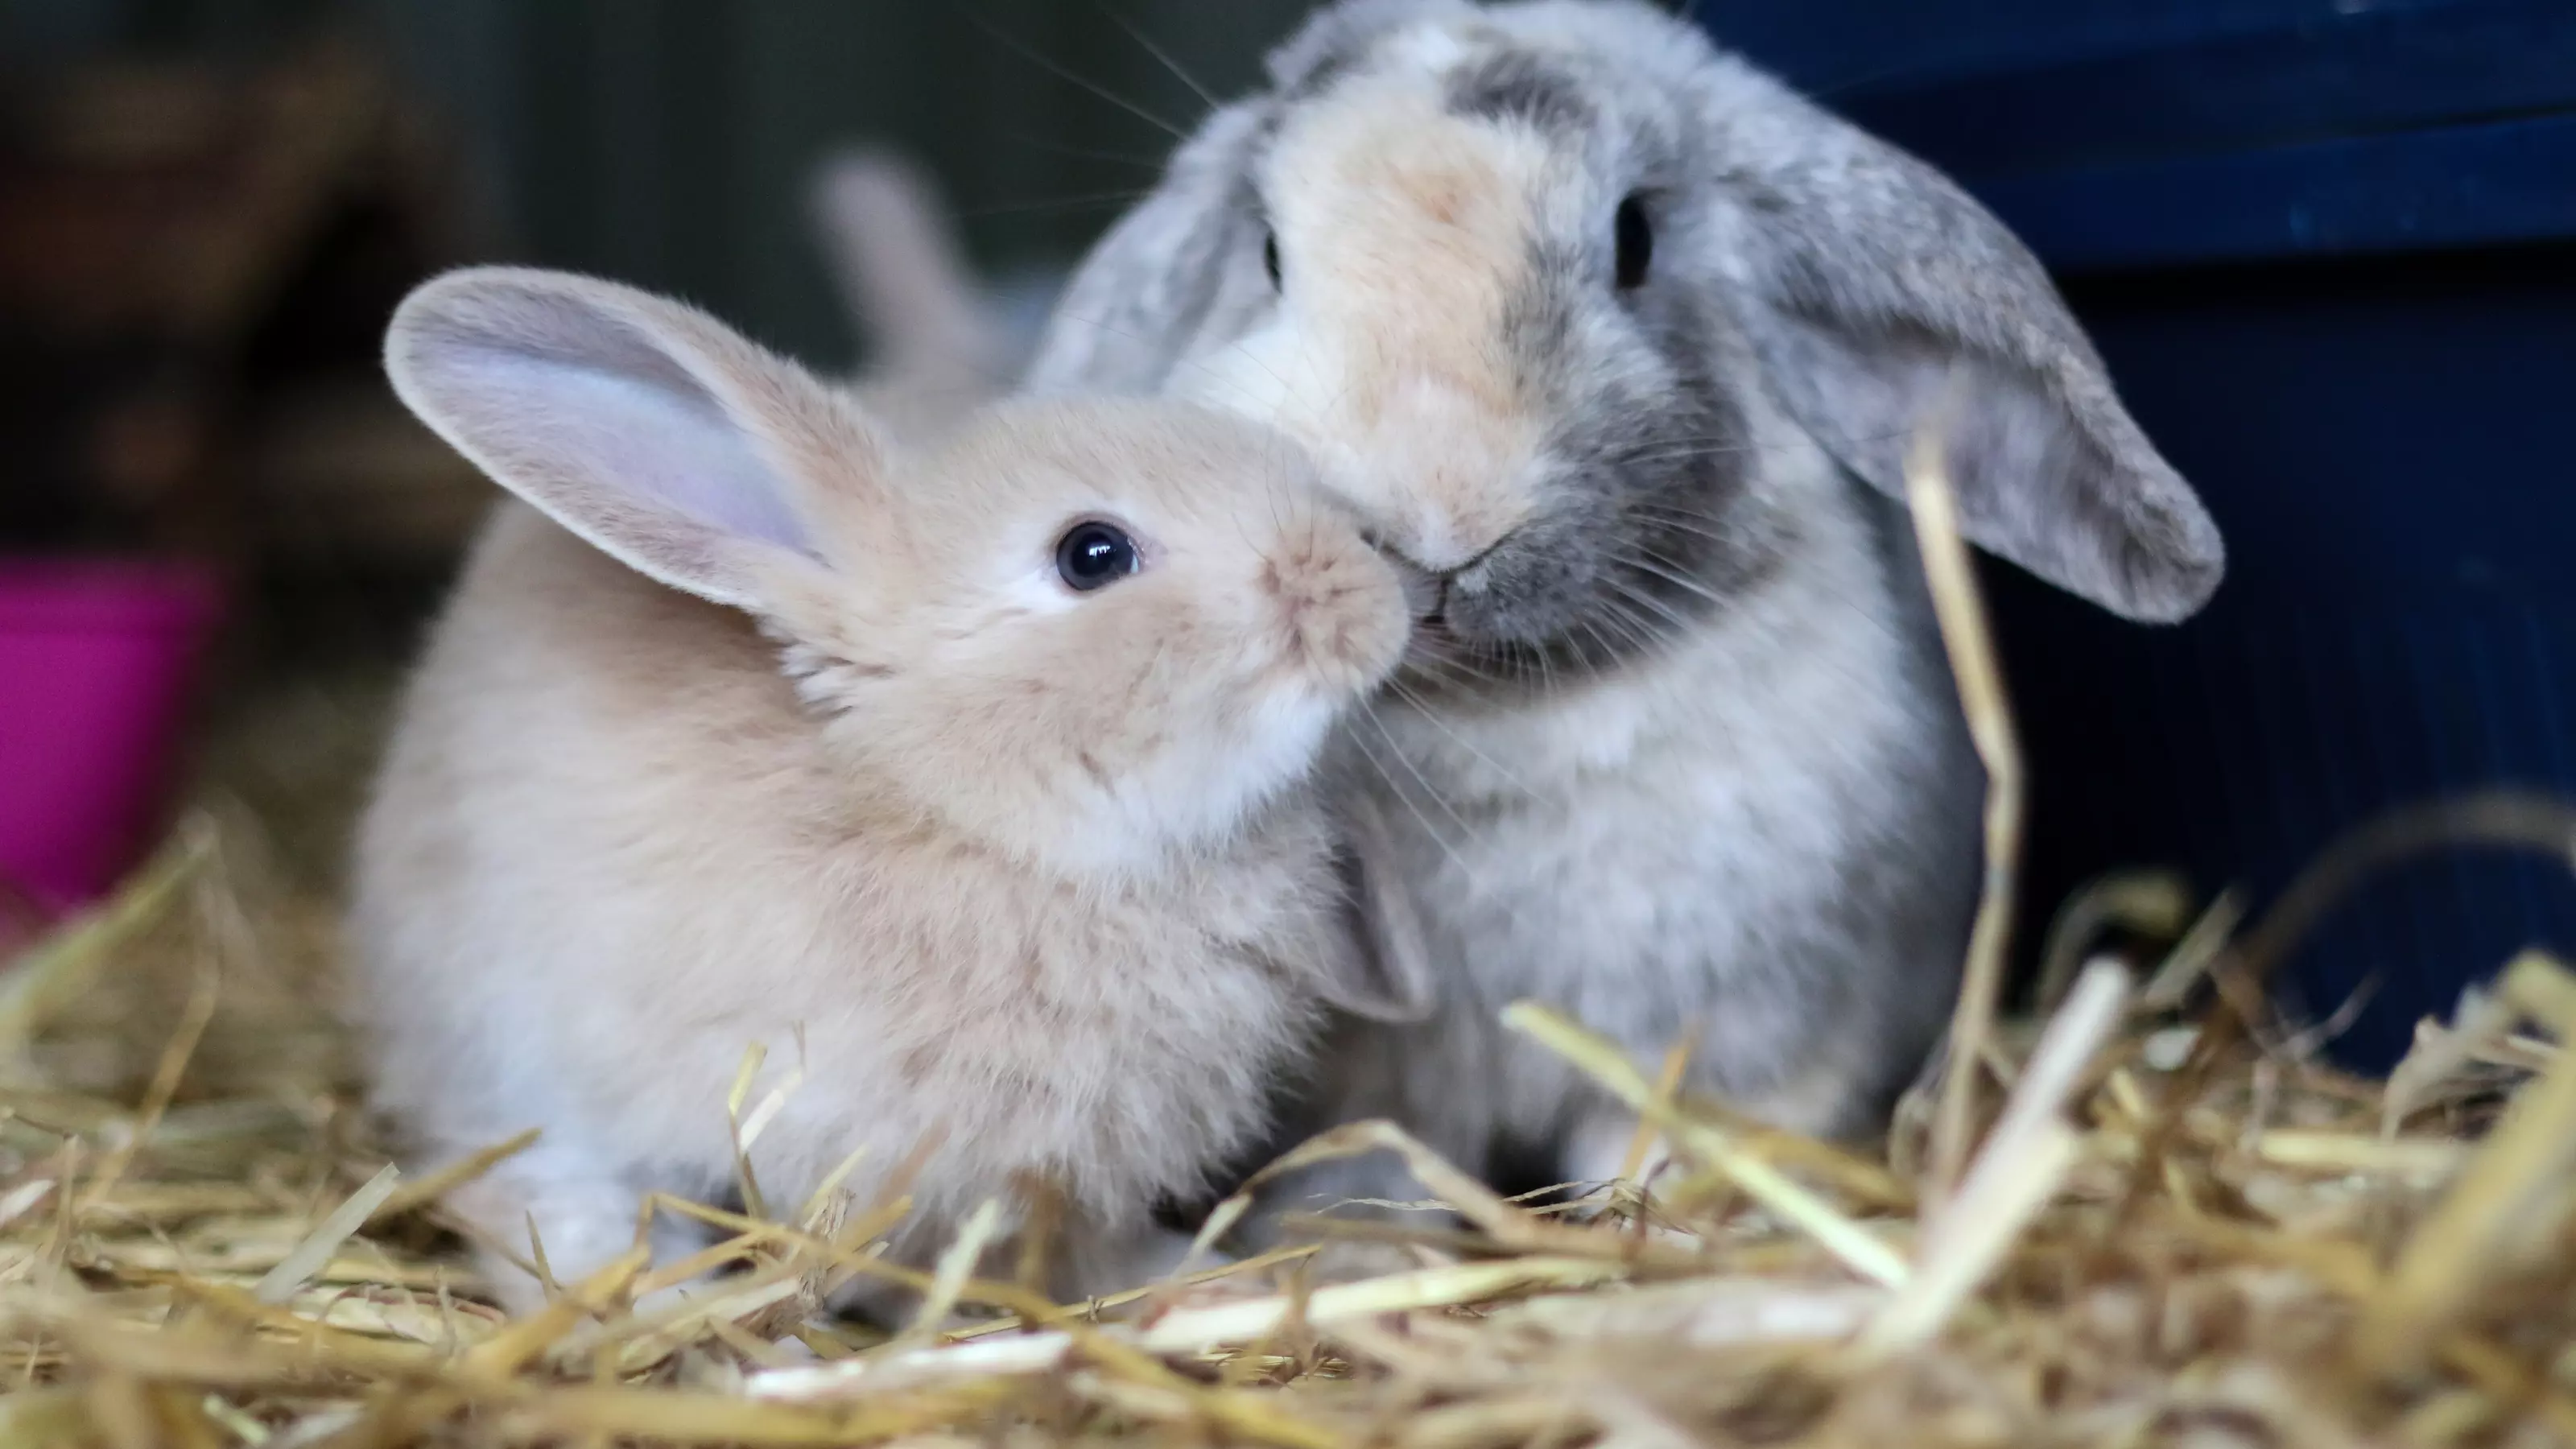 A pair of rabbits sitting side by side in their hay.